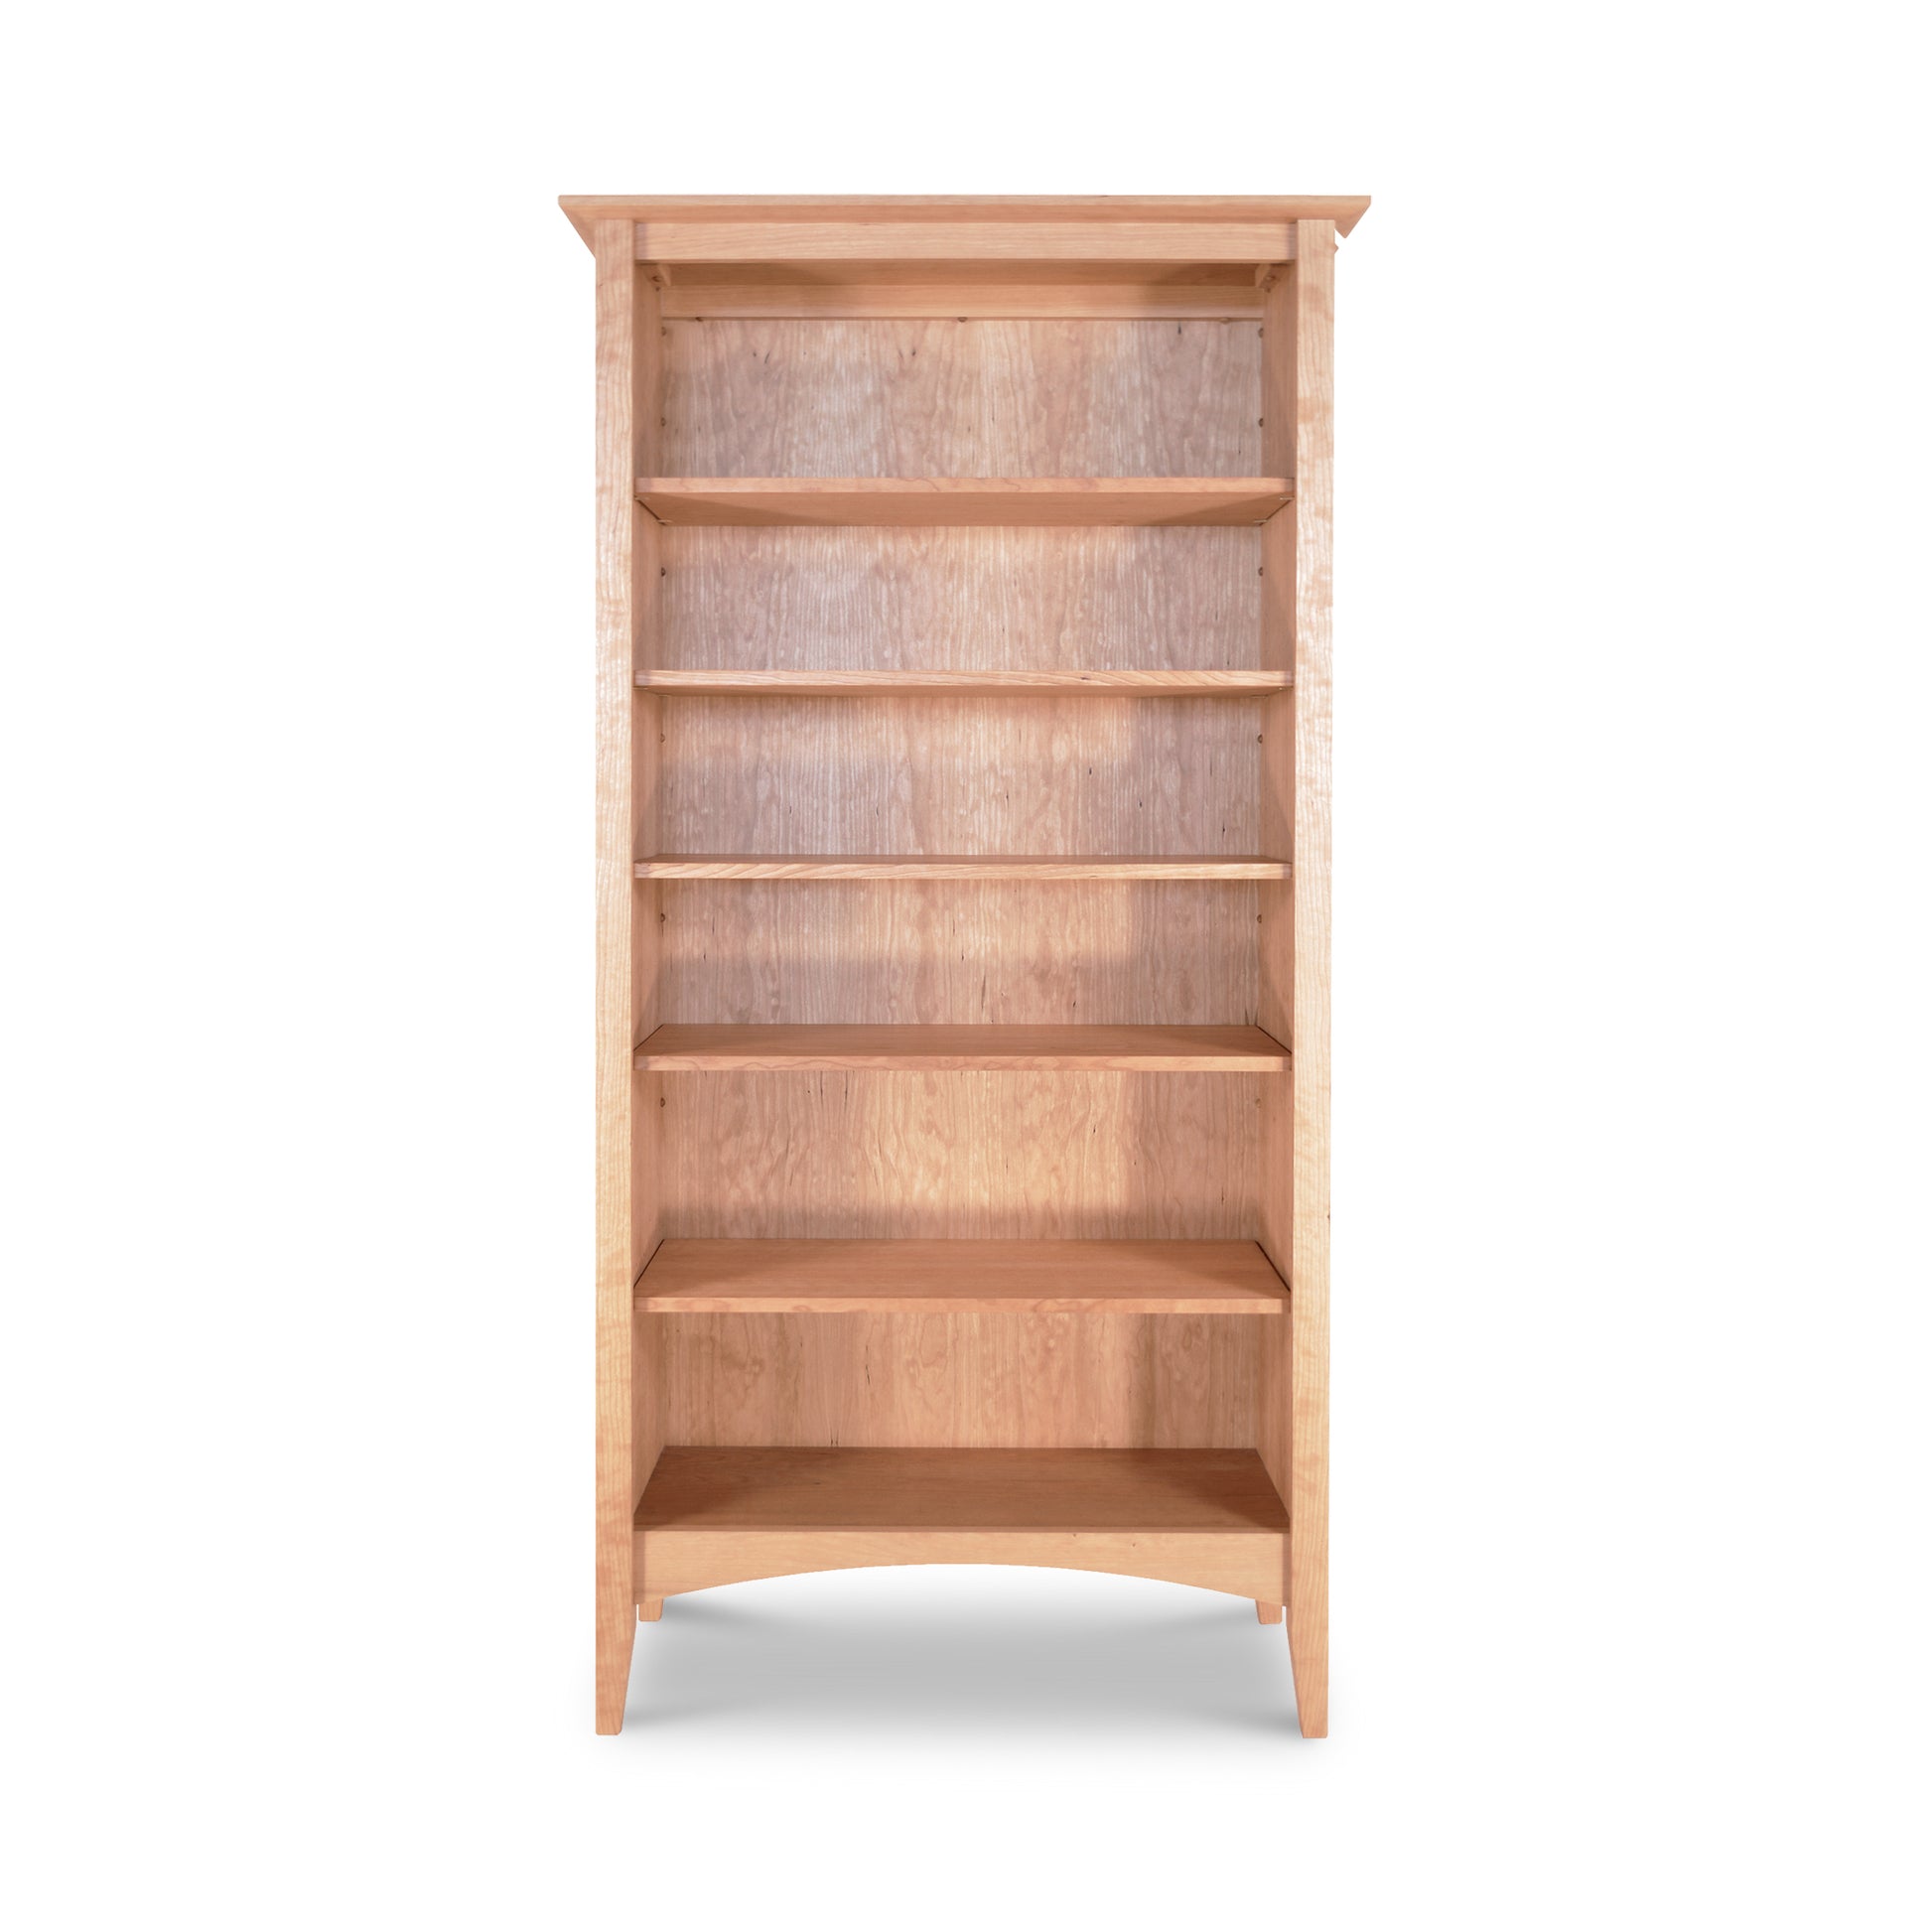 A Maple Corner Woodworks American Shaker Bookcase made of sustainably harvested hardwoods on a white background.